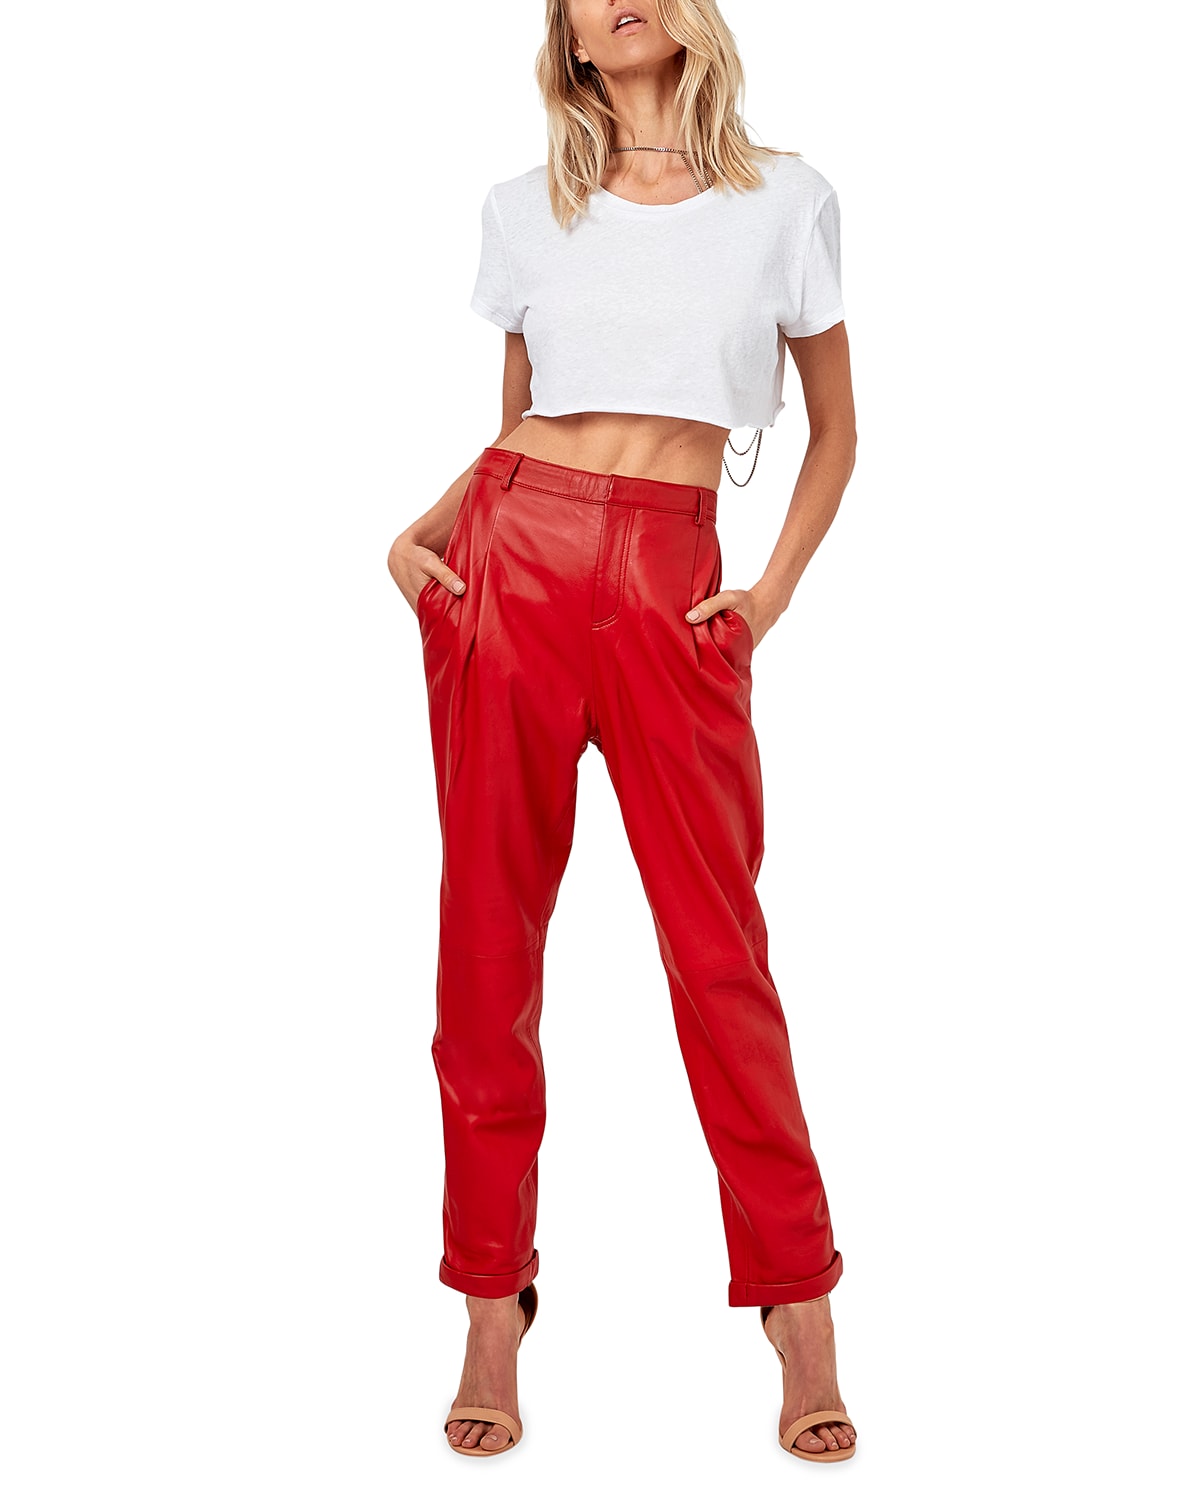 The Denise Recycled Leather Ankle Trousers